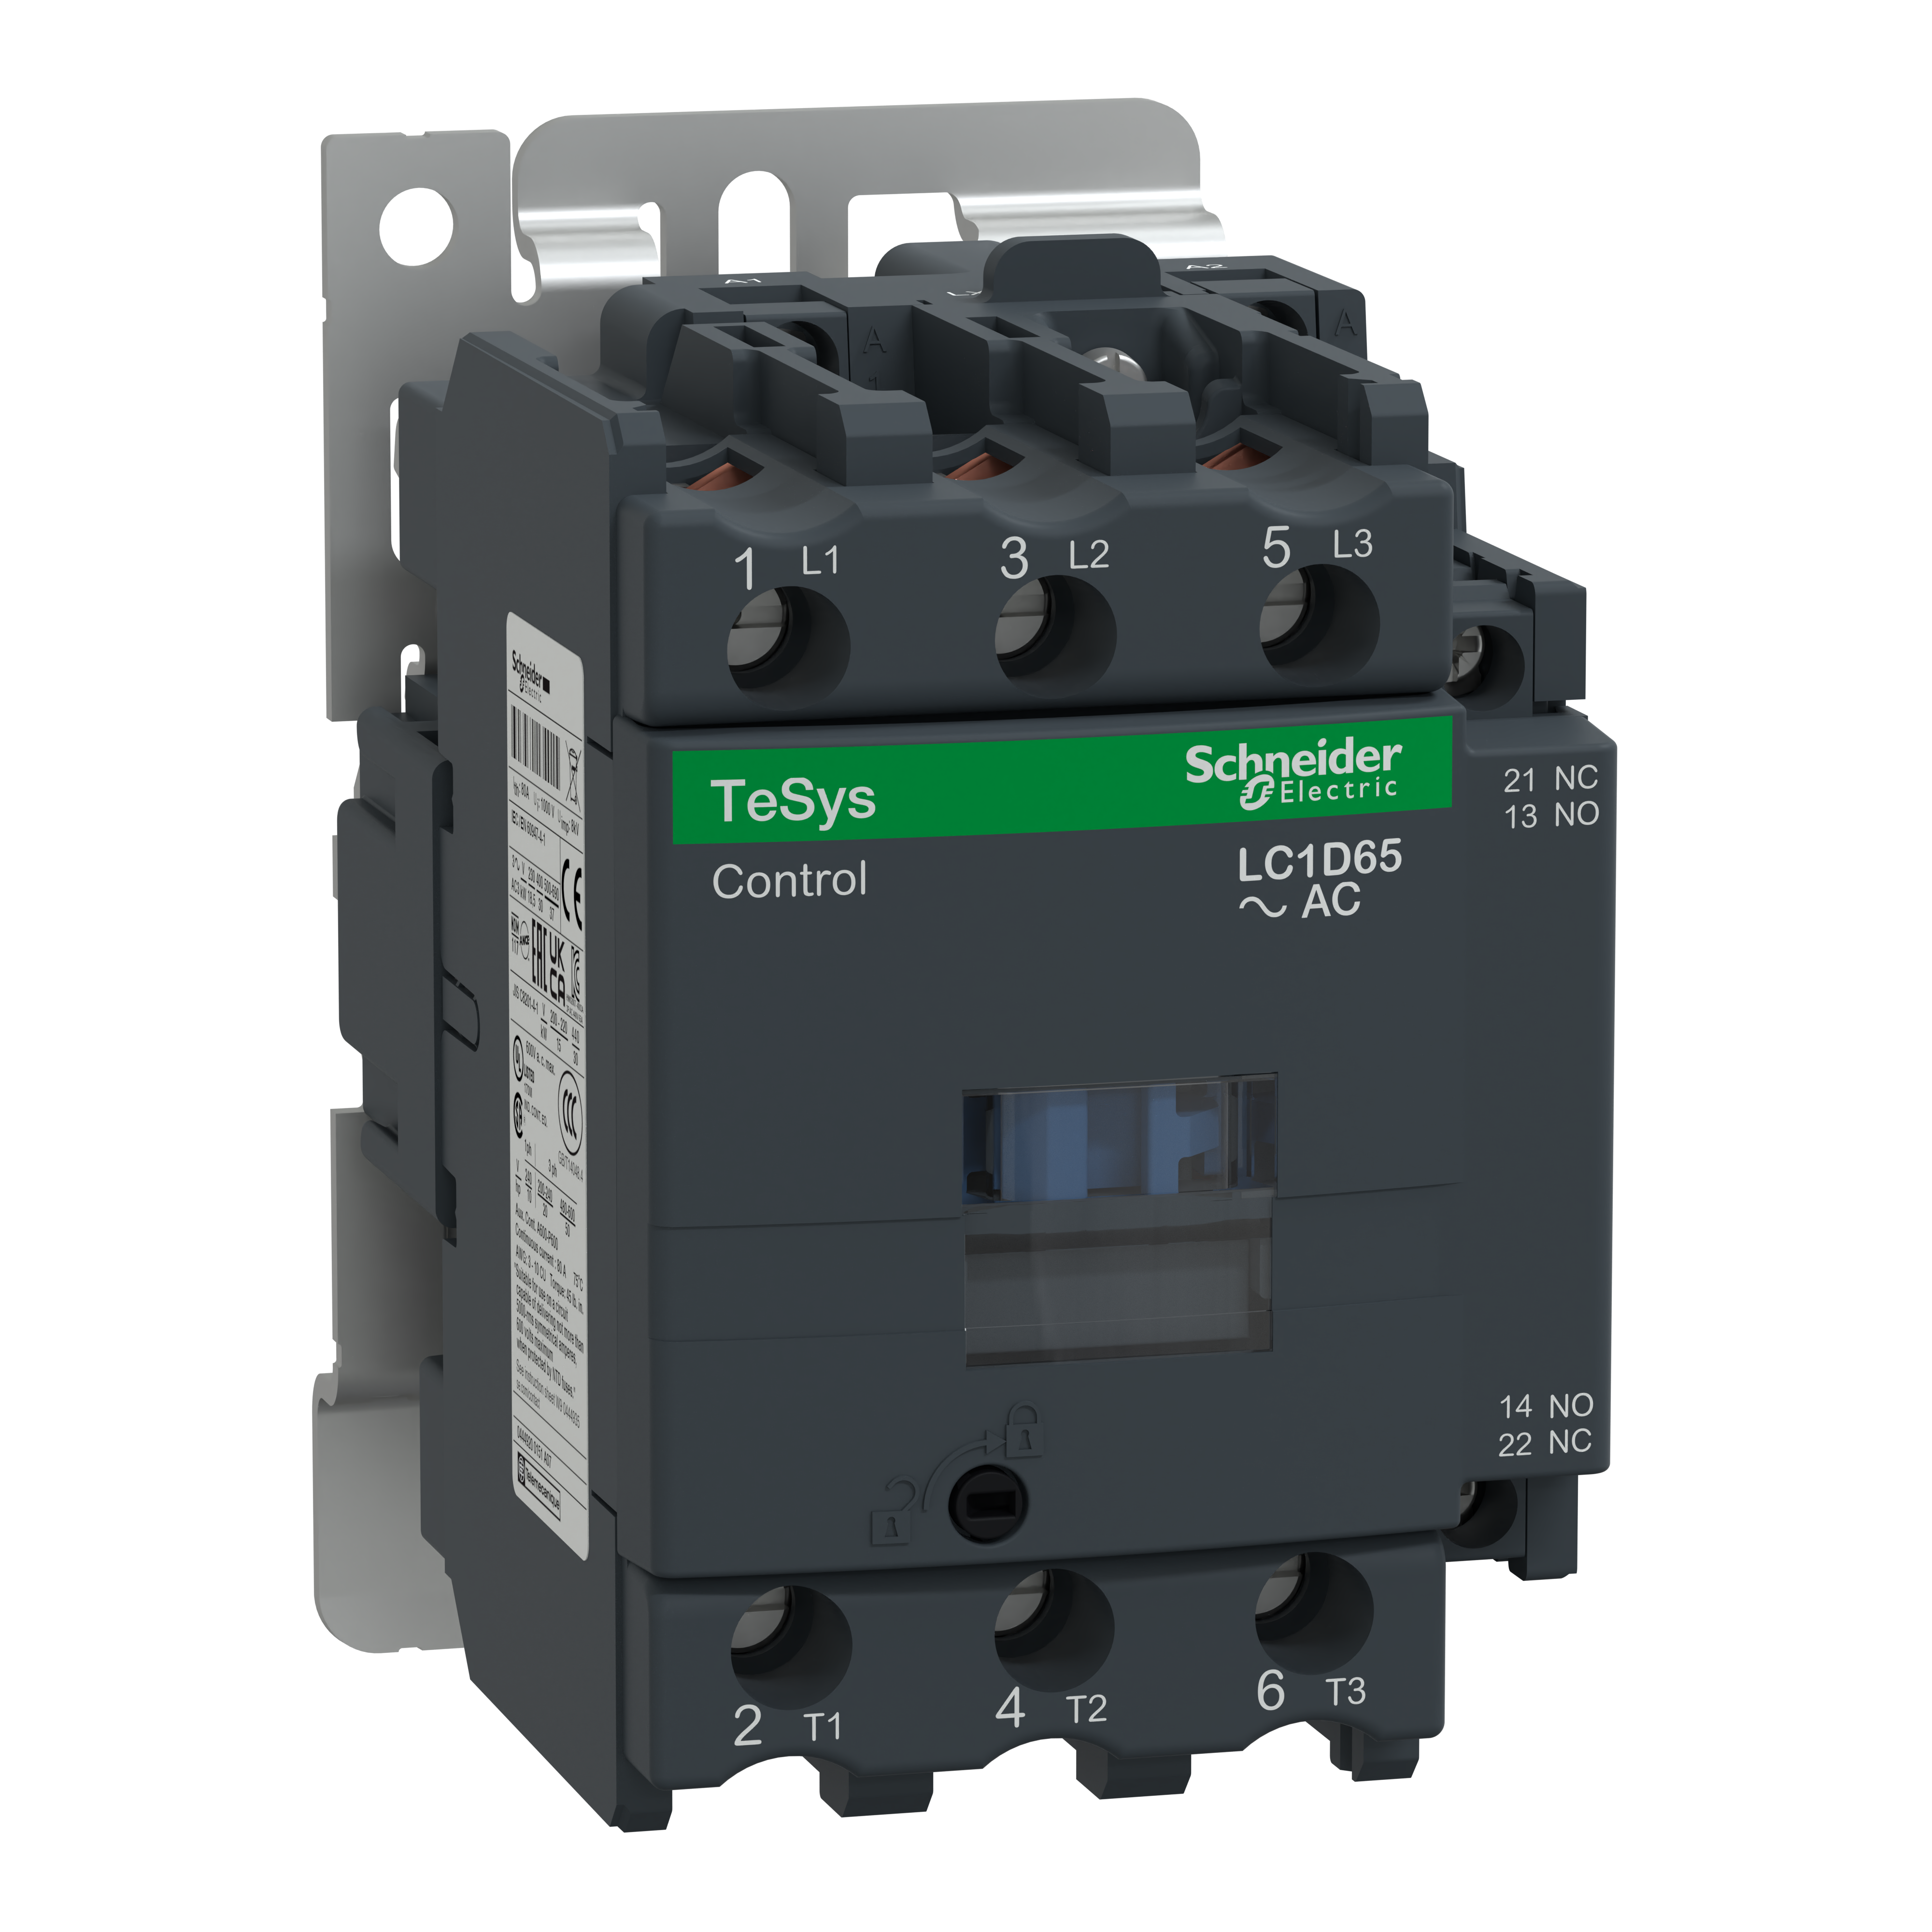 IEC contactor, TeSys D, nonreversing, 65A, 40HP at 480VAC, up to 100kA SCCR, 3 phase, 3 NO, 200VAC 60Hz coil, open style